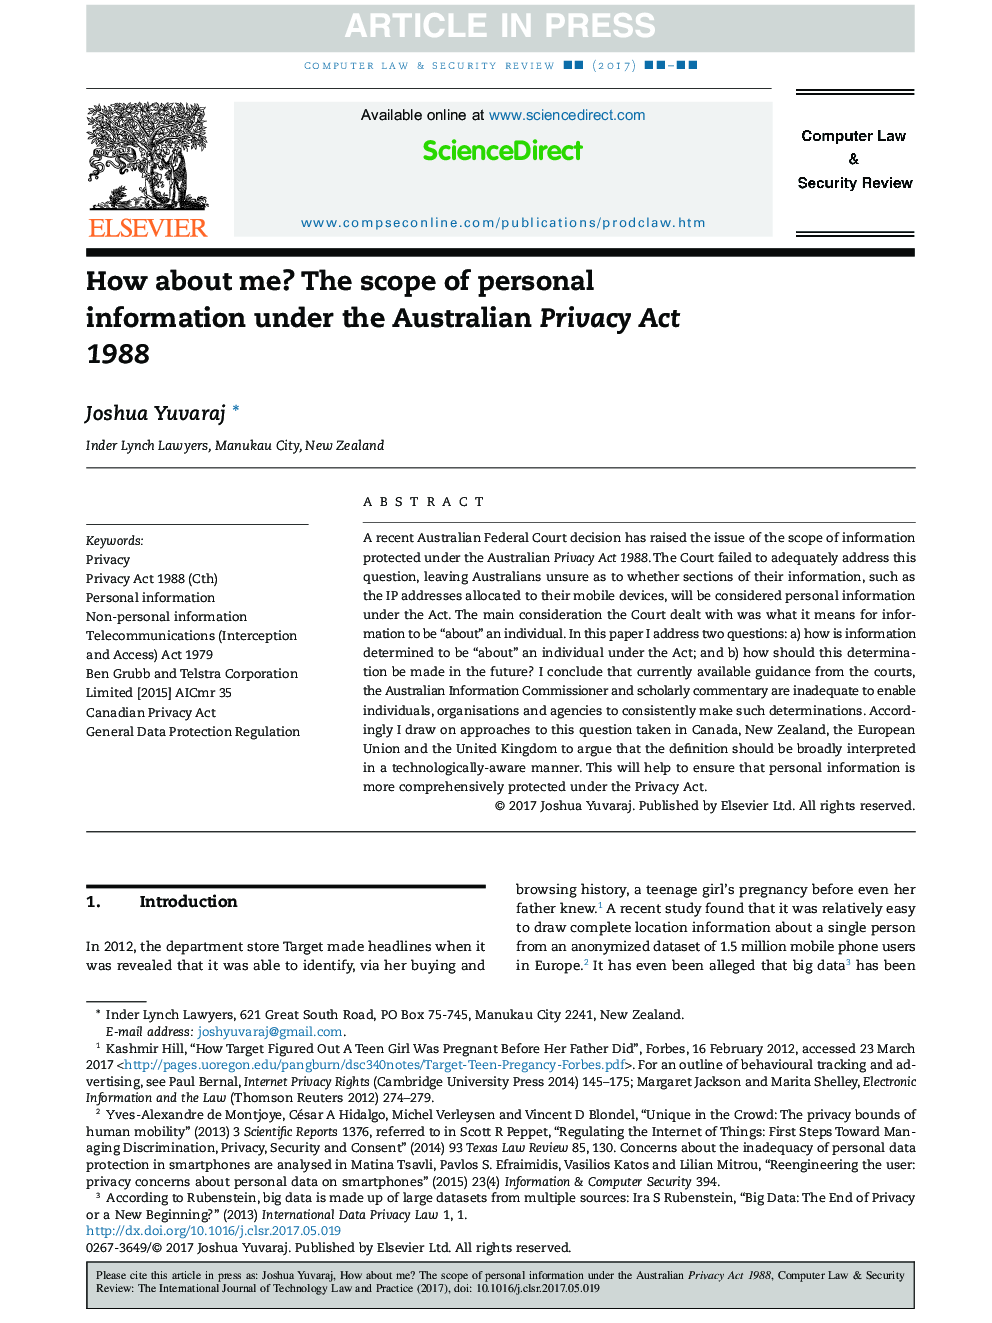 How about me? The scope of personal information under the Australian Privacy Act 1988